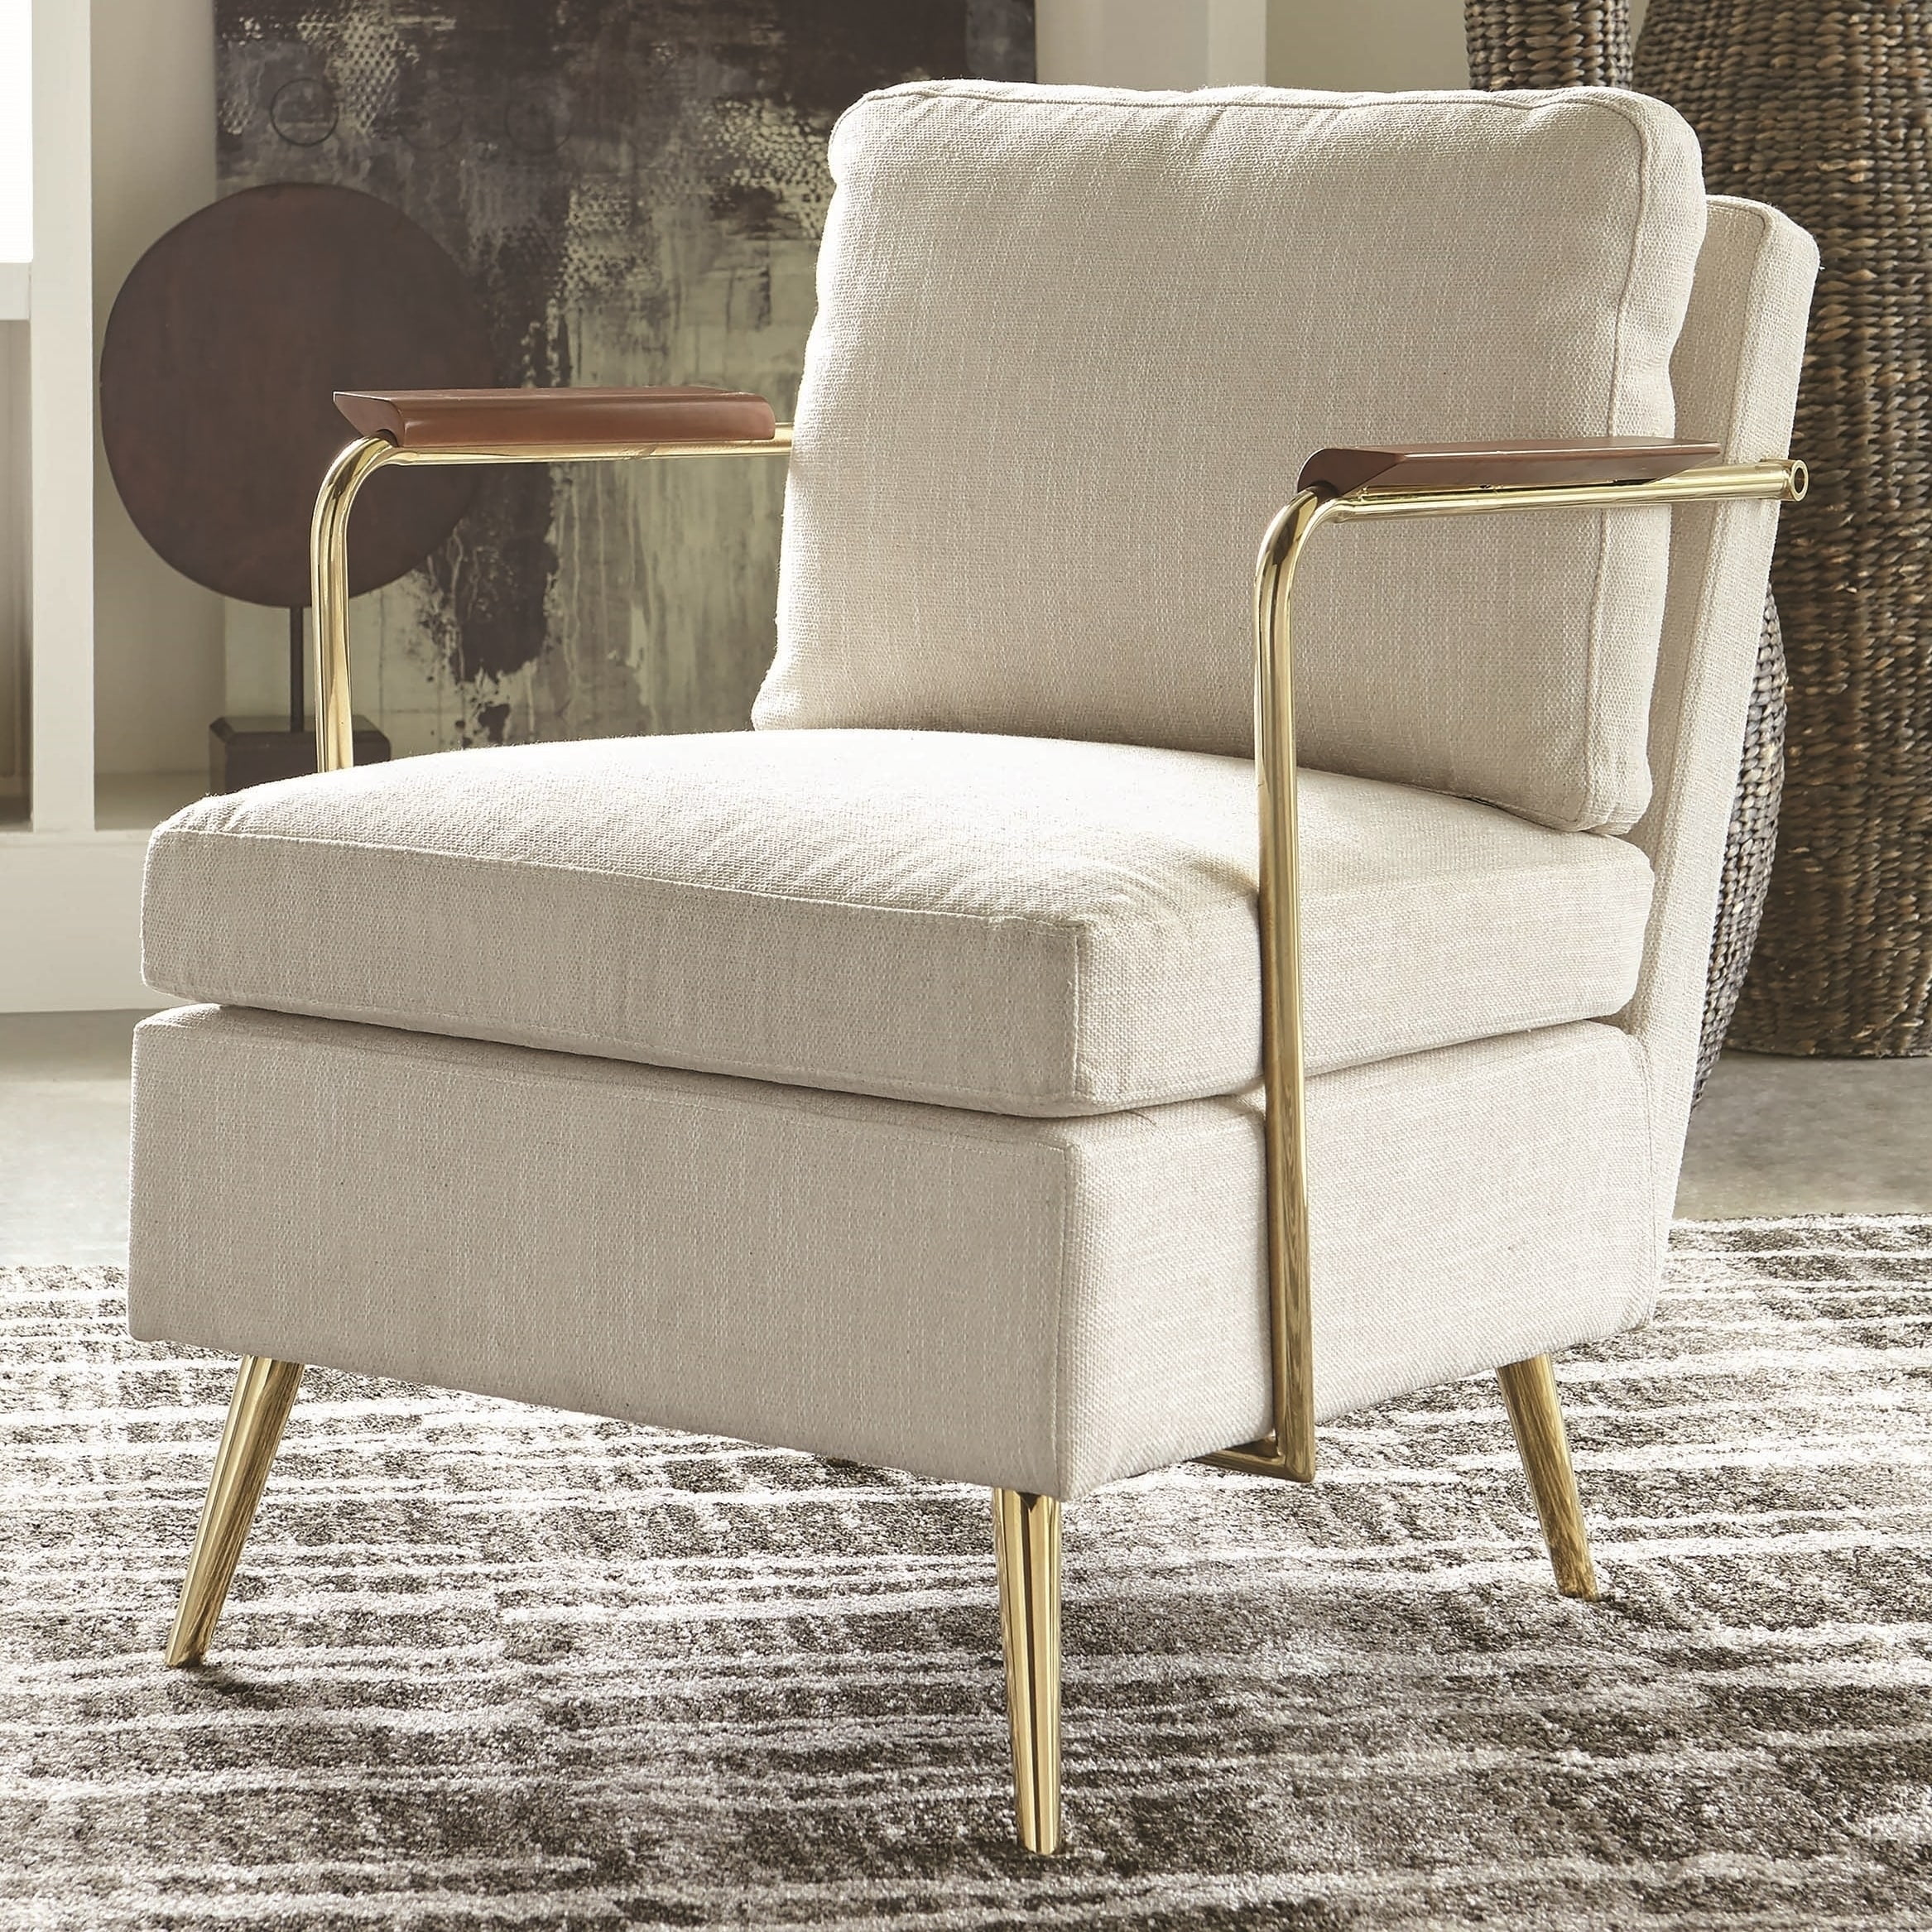 A Line Furniture Mid-Century Modern Design Living Room Accent Chair